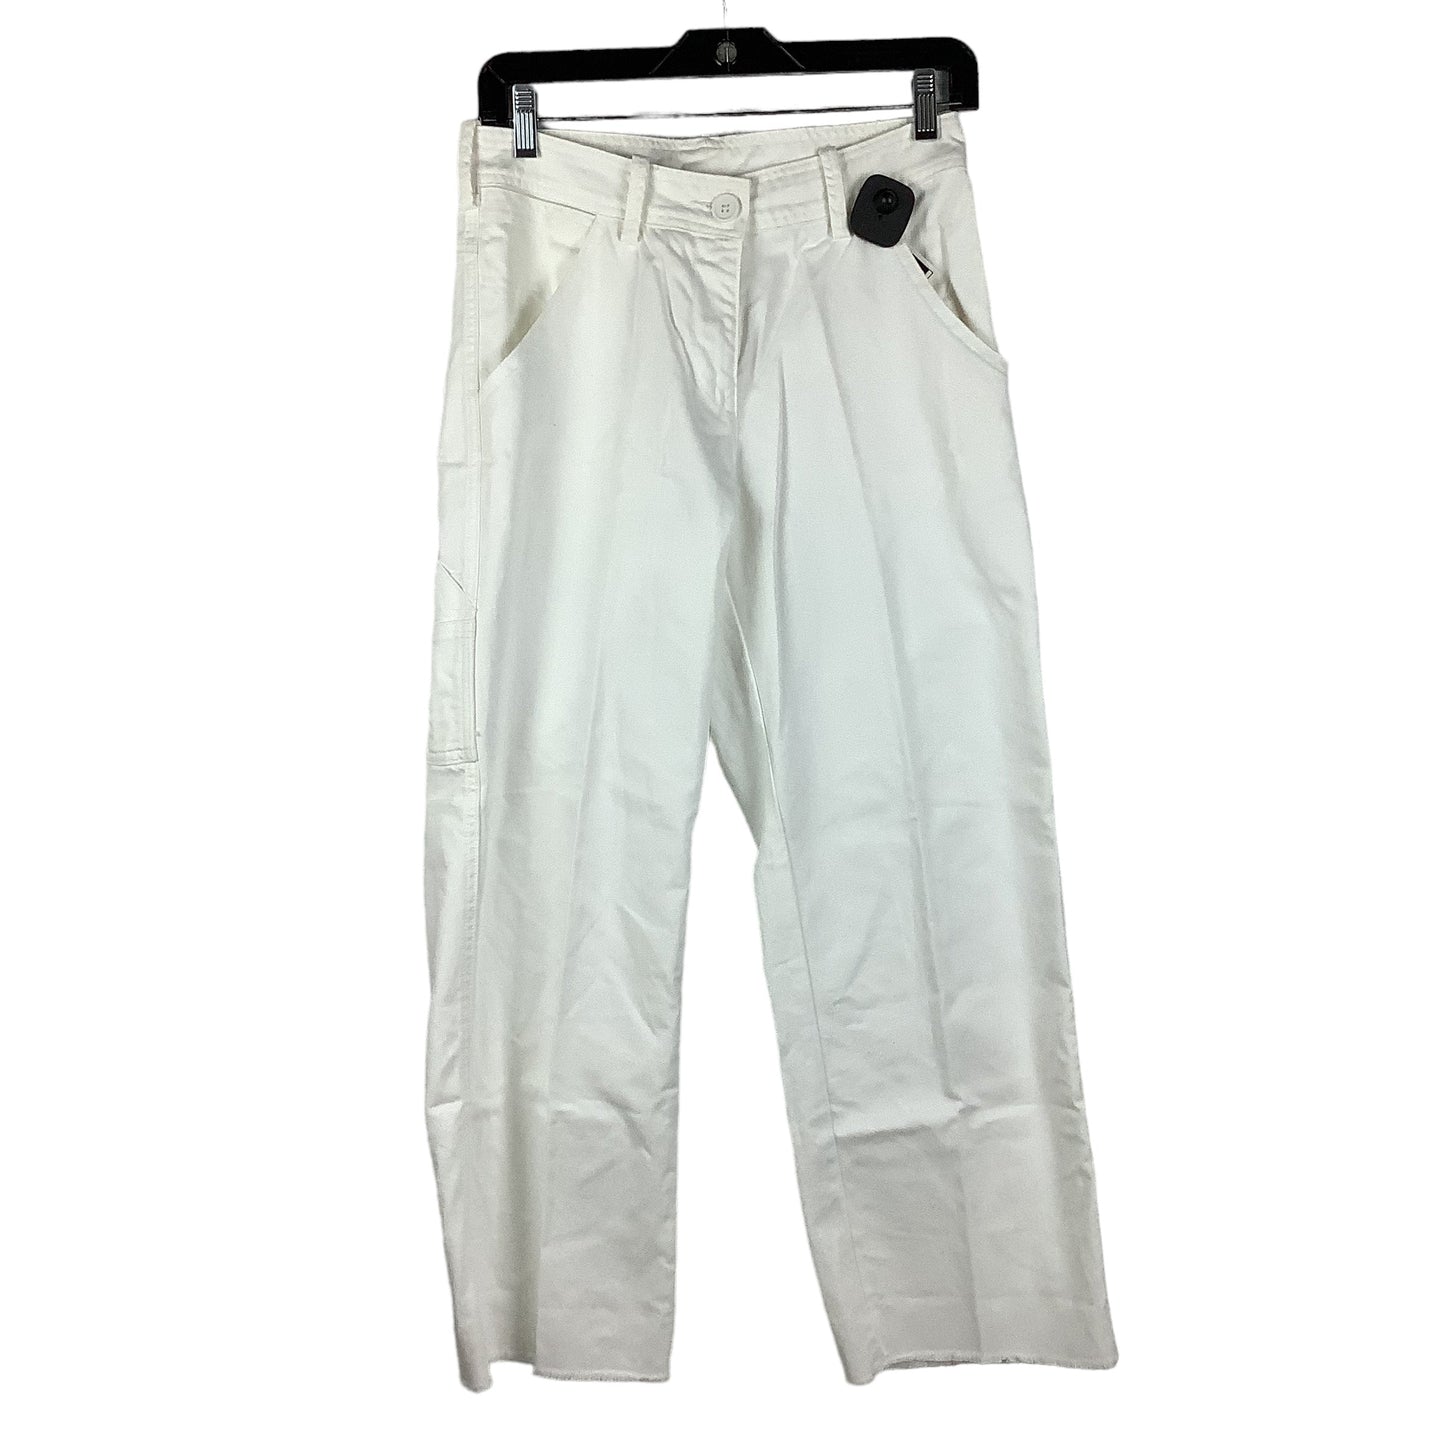 White Pants Other Free People, Size 2